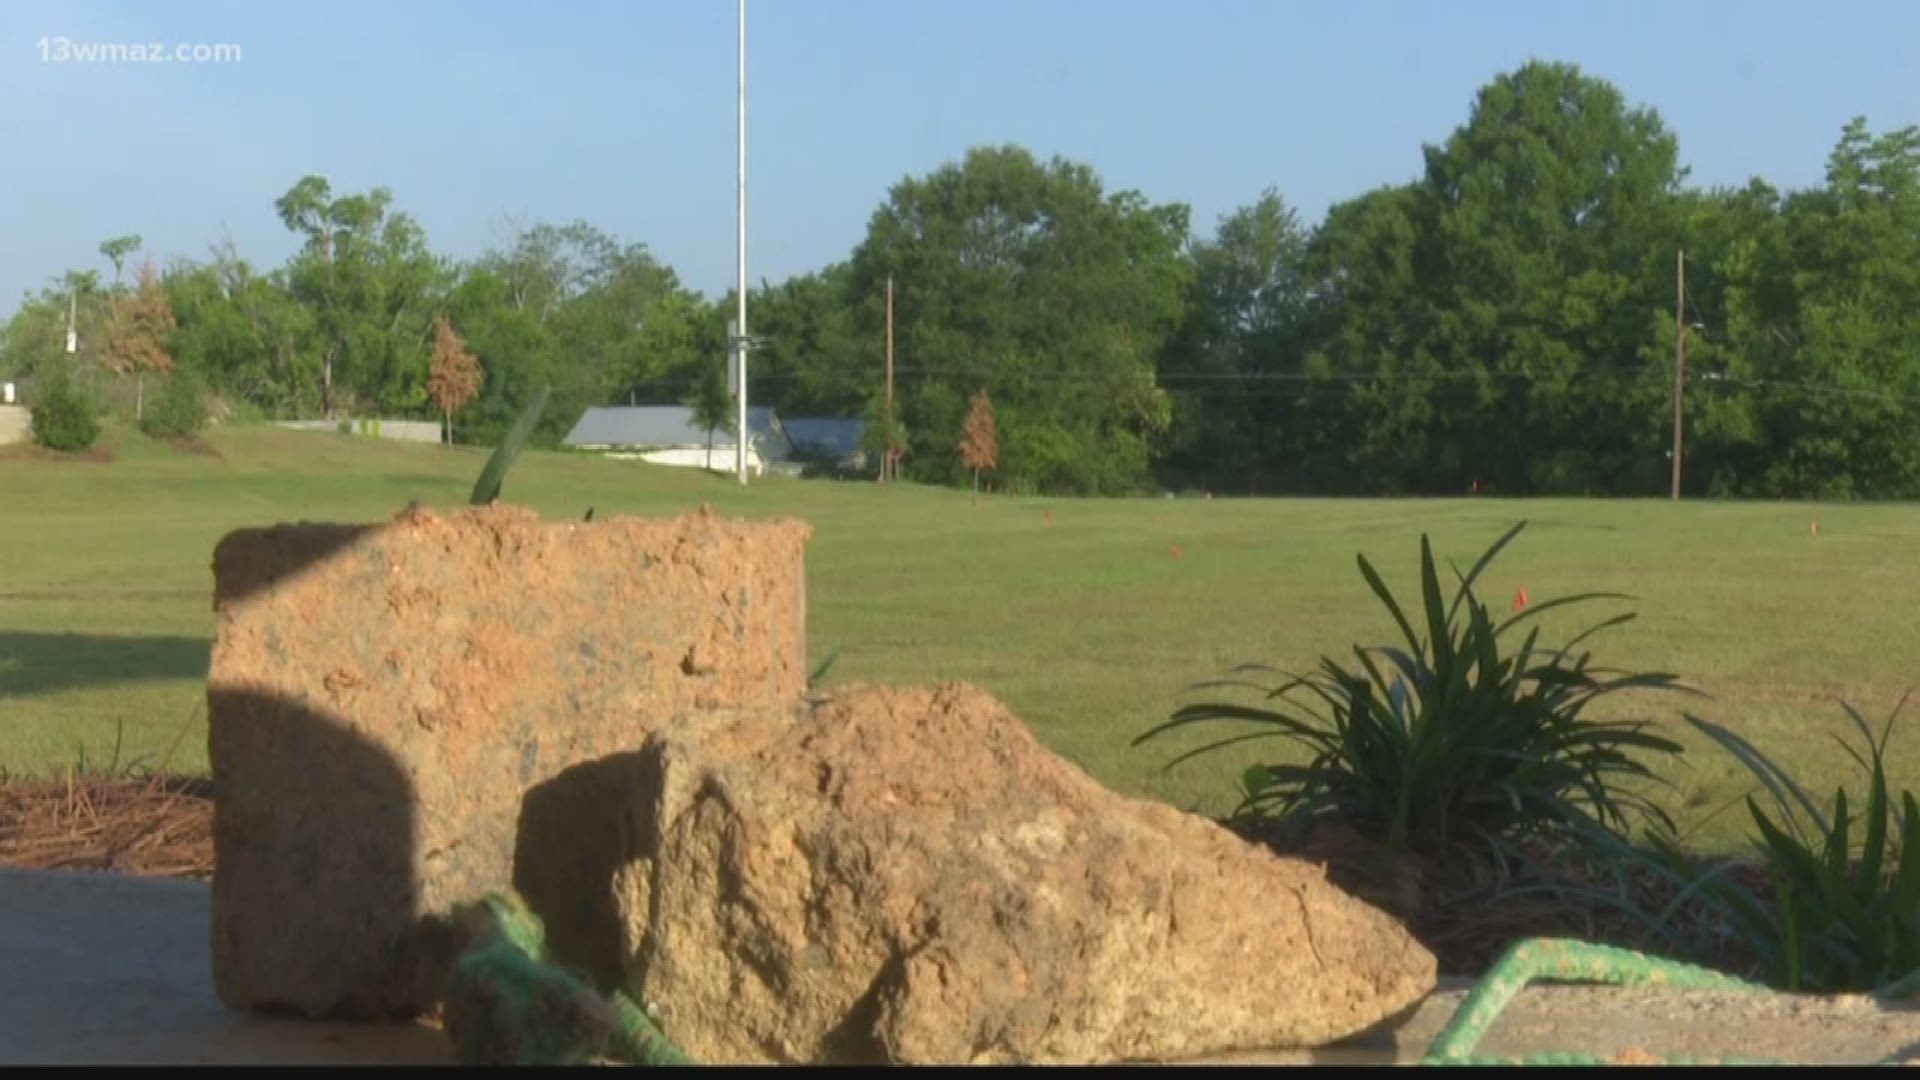 Just in time for summer, a new park is opening in Macon's Pleasant Hill community off Riverside Drive. The blight on Wise Avenue was torn down and turned into a green space with a recreational field.